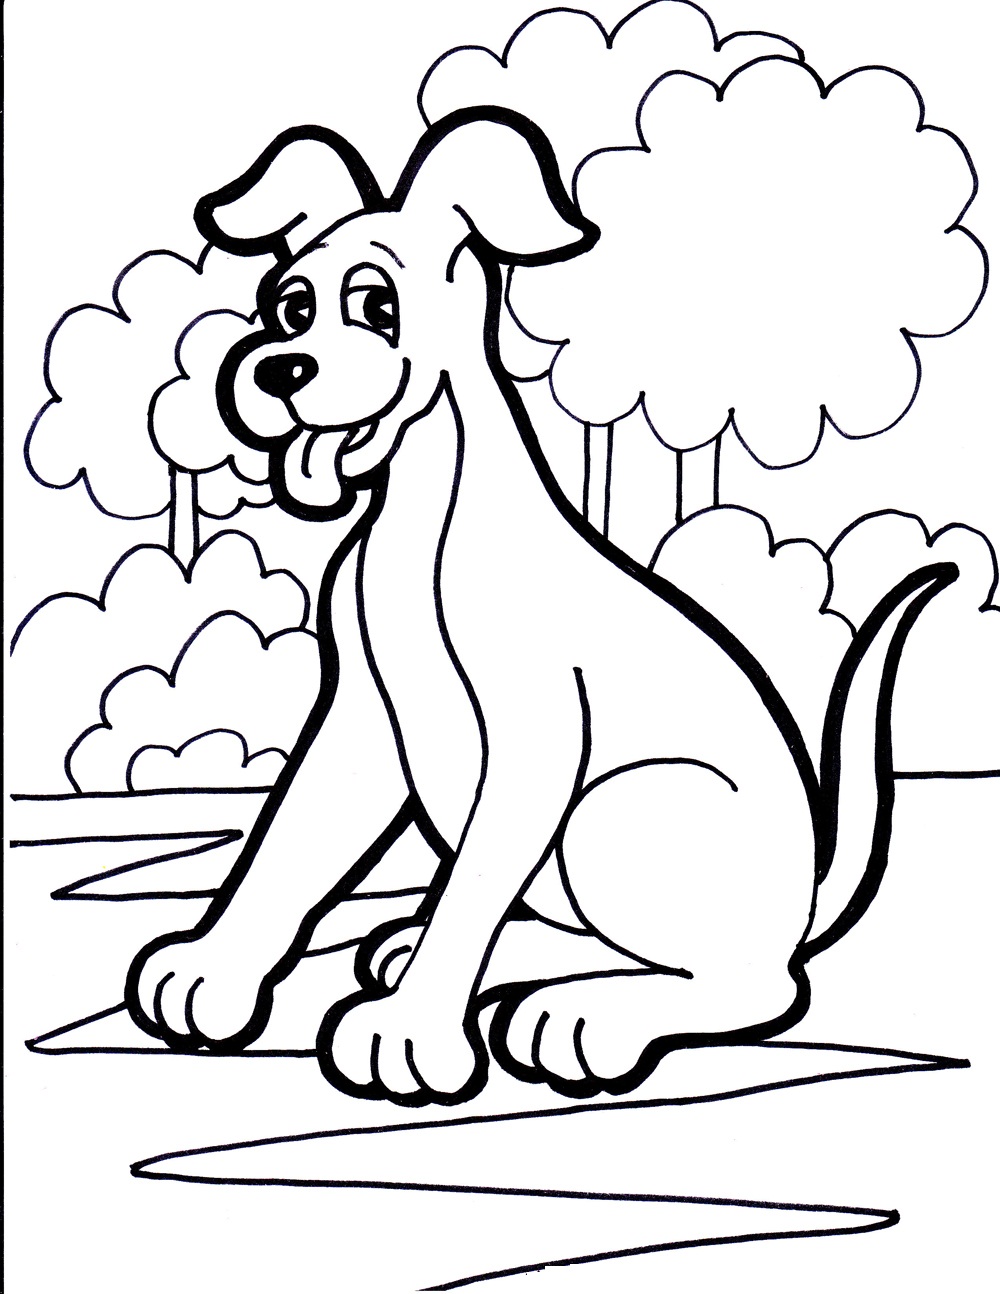 Printable Coloring Pages Of Dogs Customize And Print